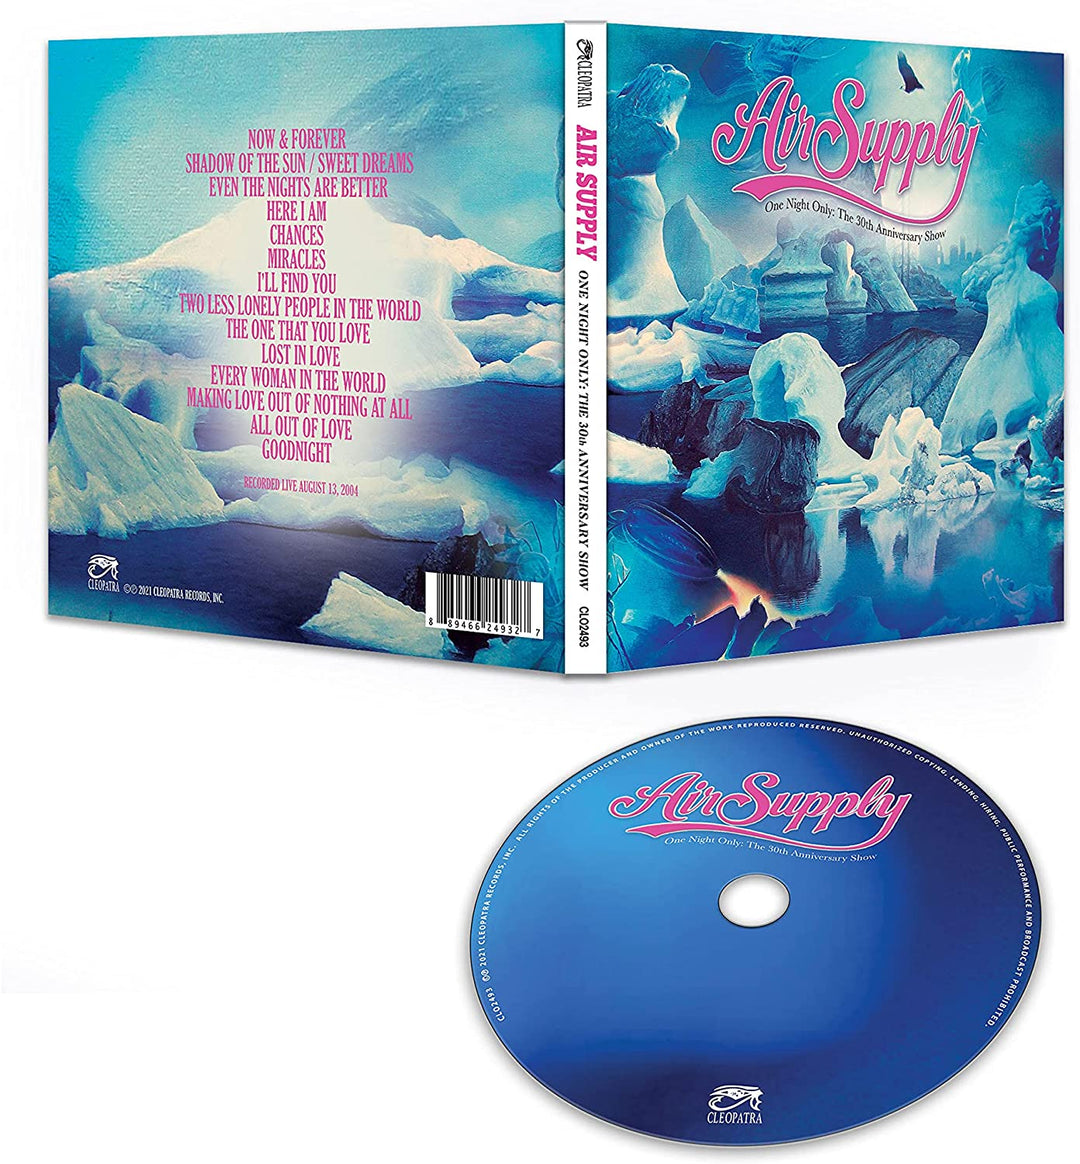 Air Supply - One Night Only – The 30th Anniversary Show [Audio CD]